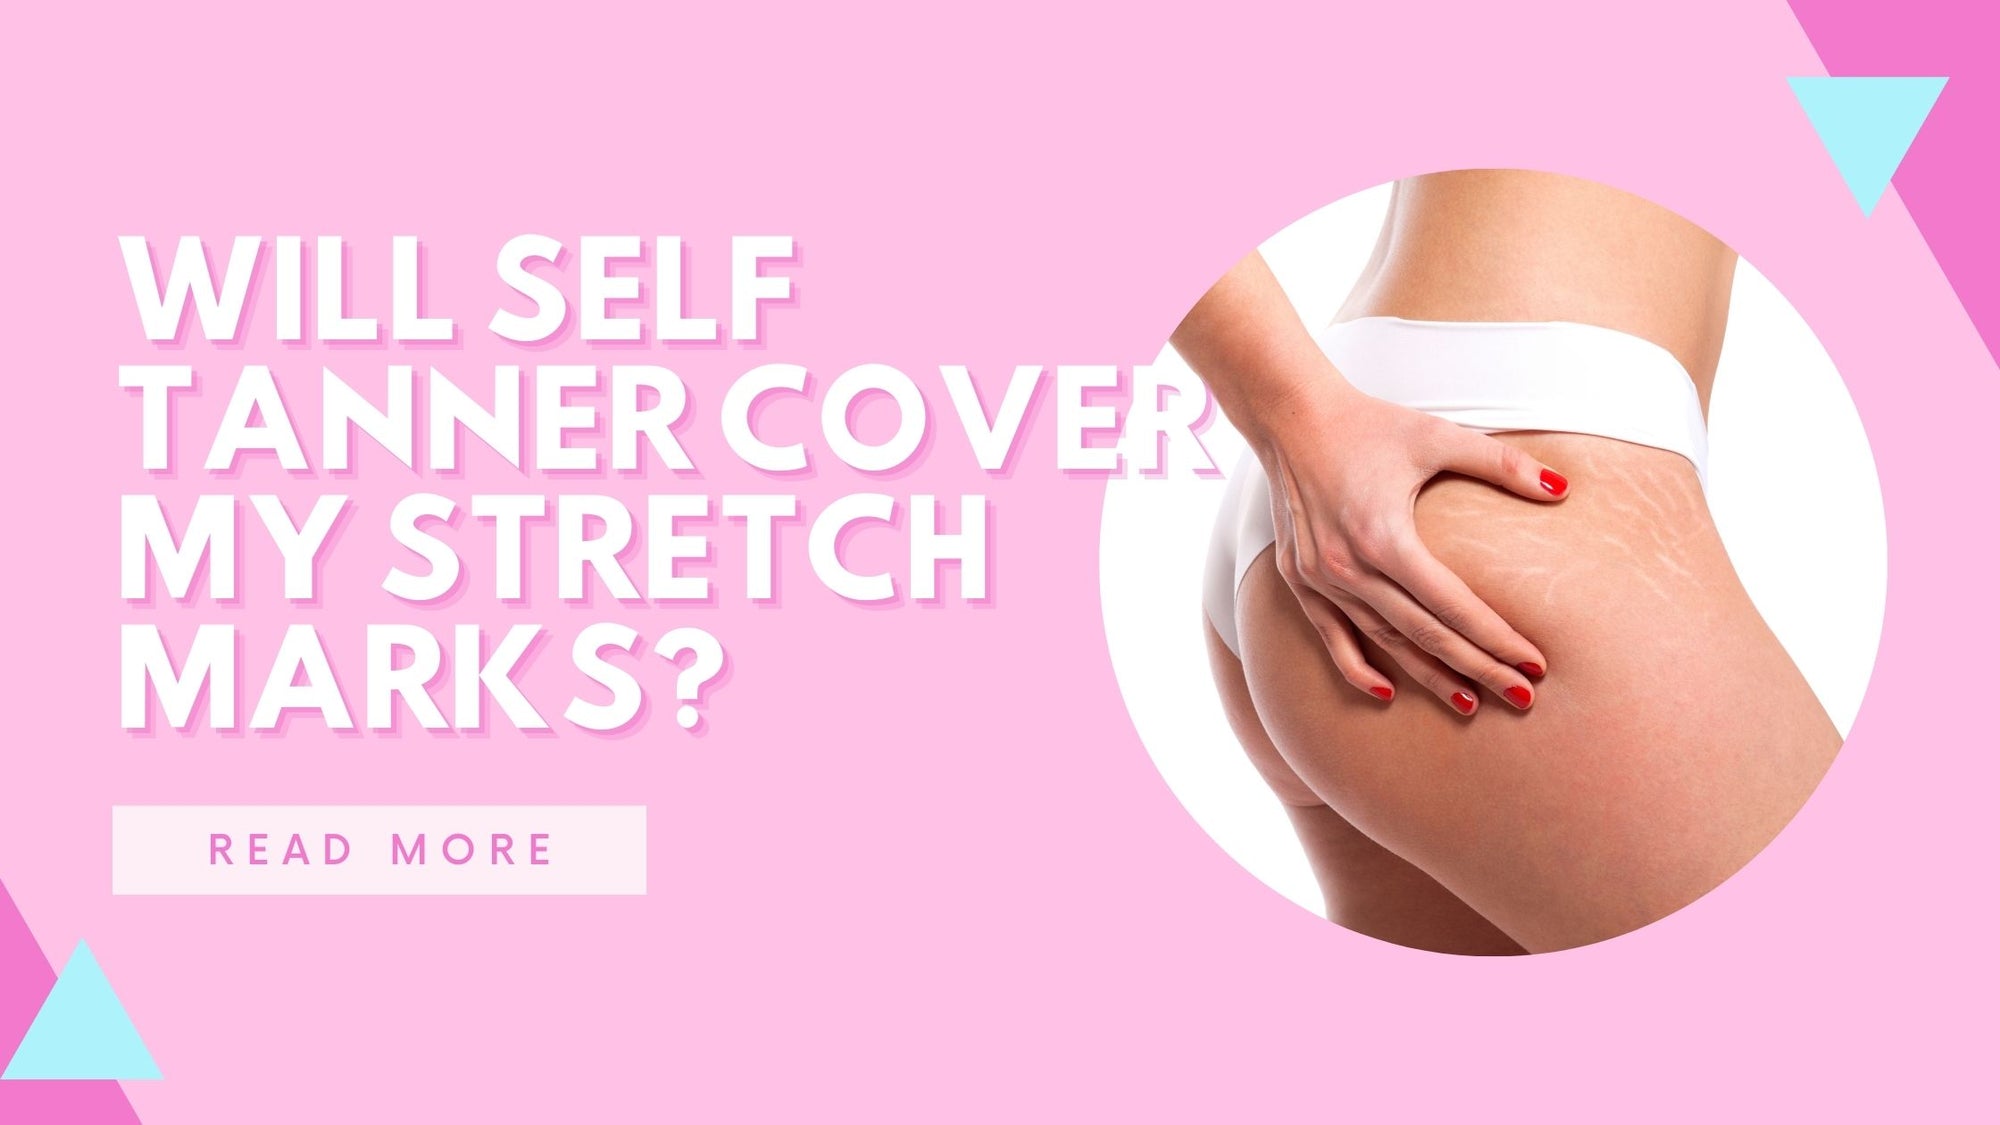 Does self tanner cover stretch marks?